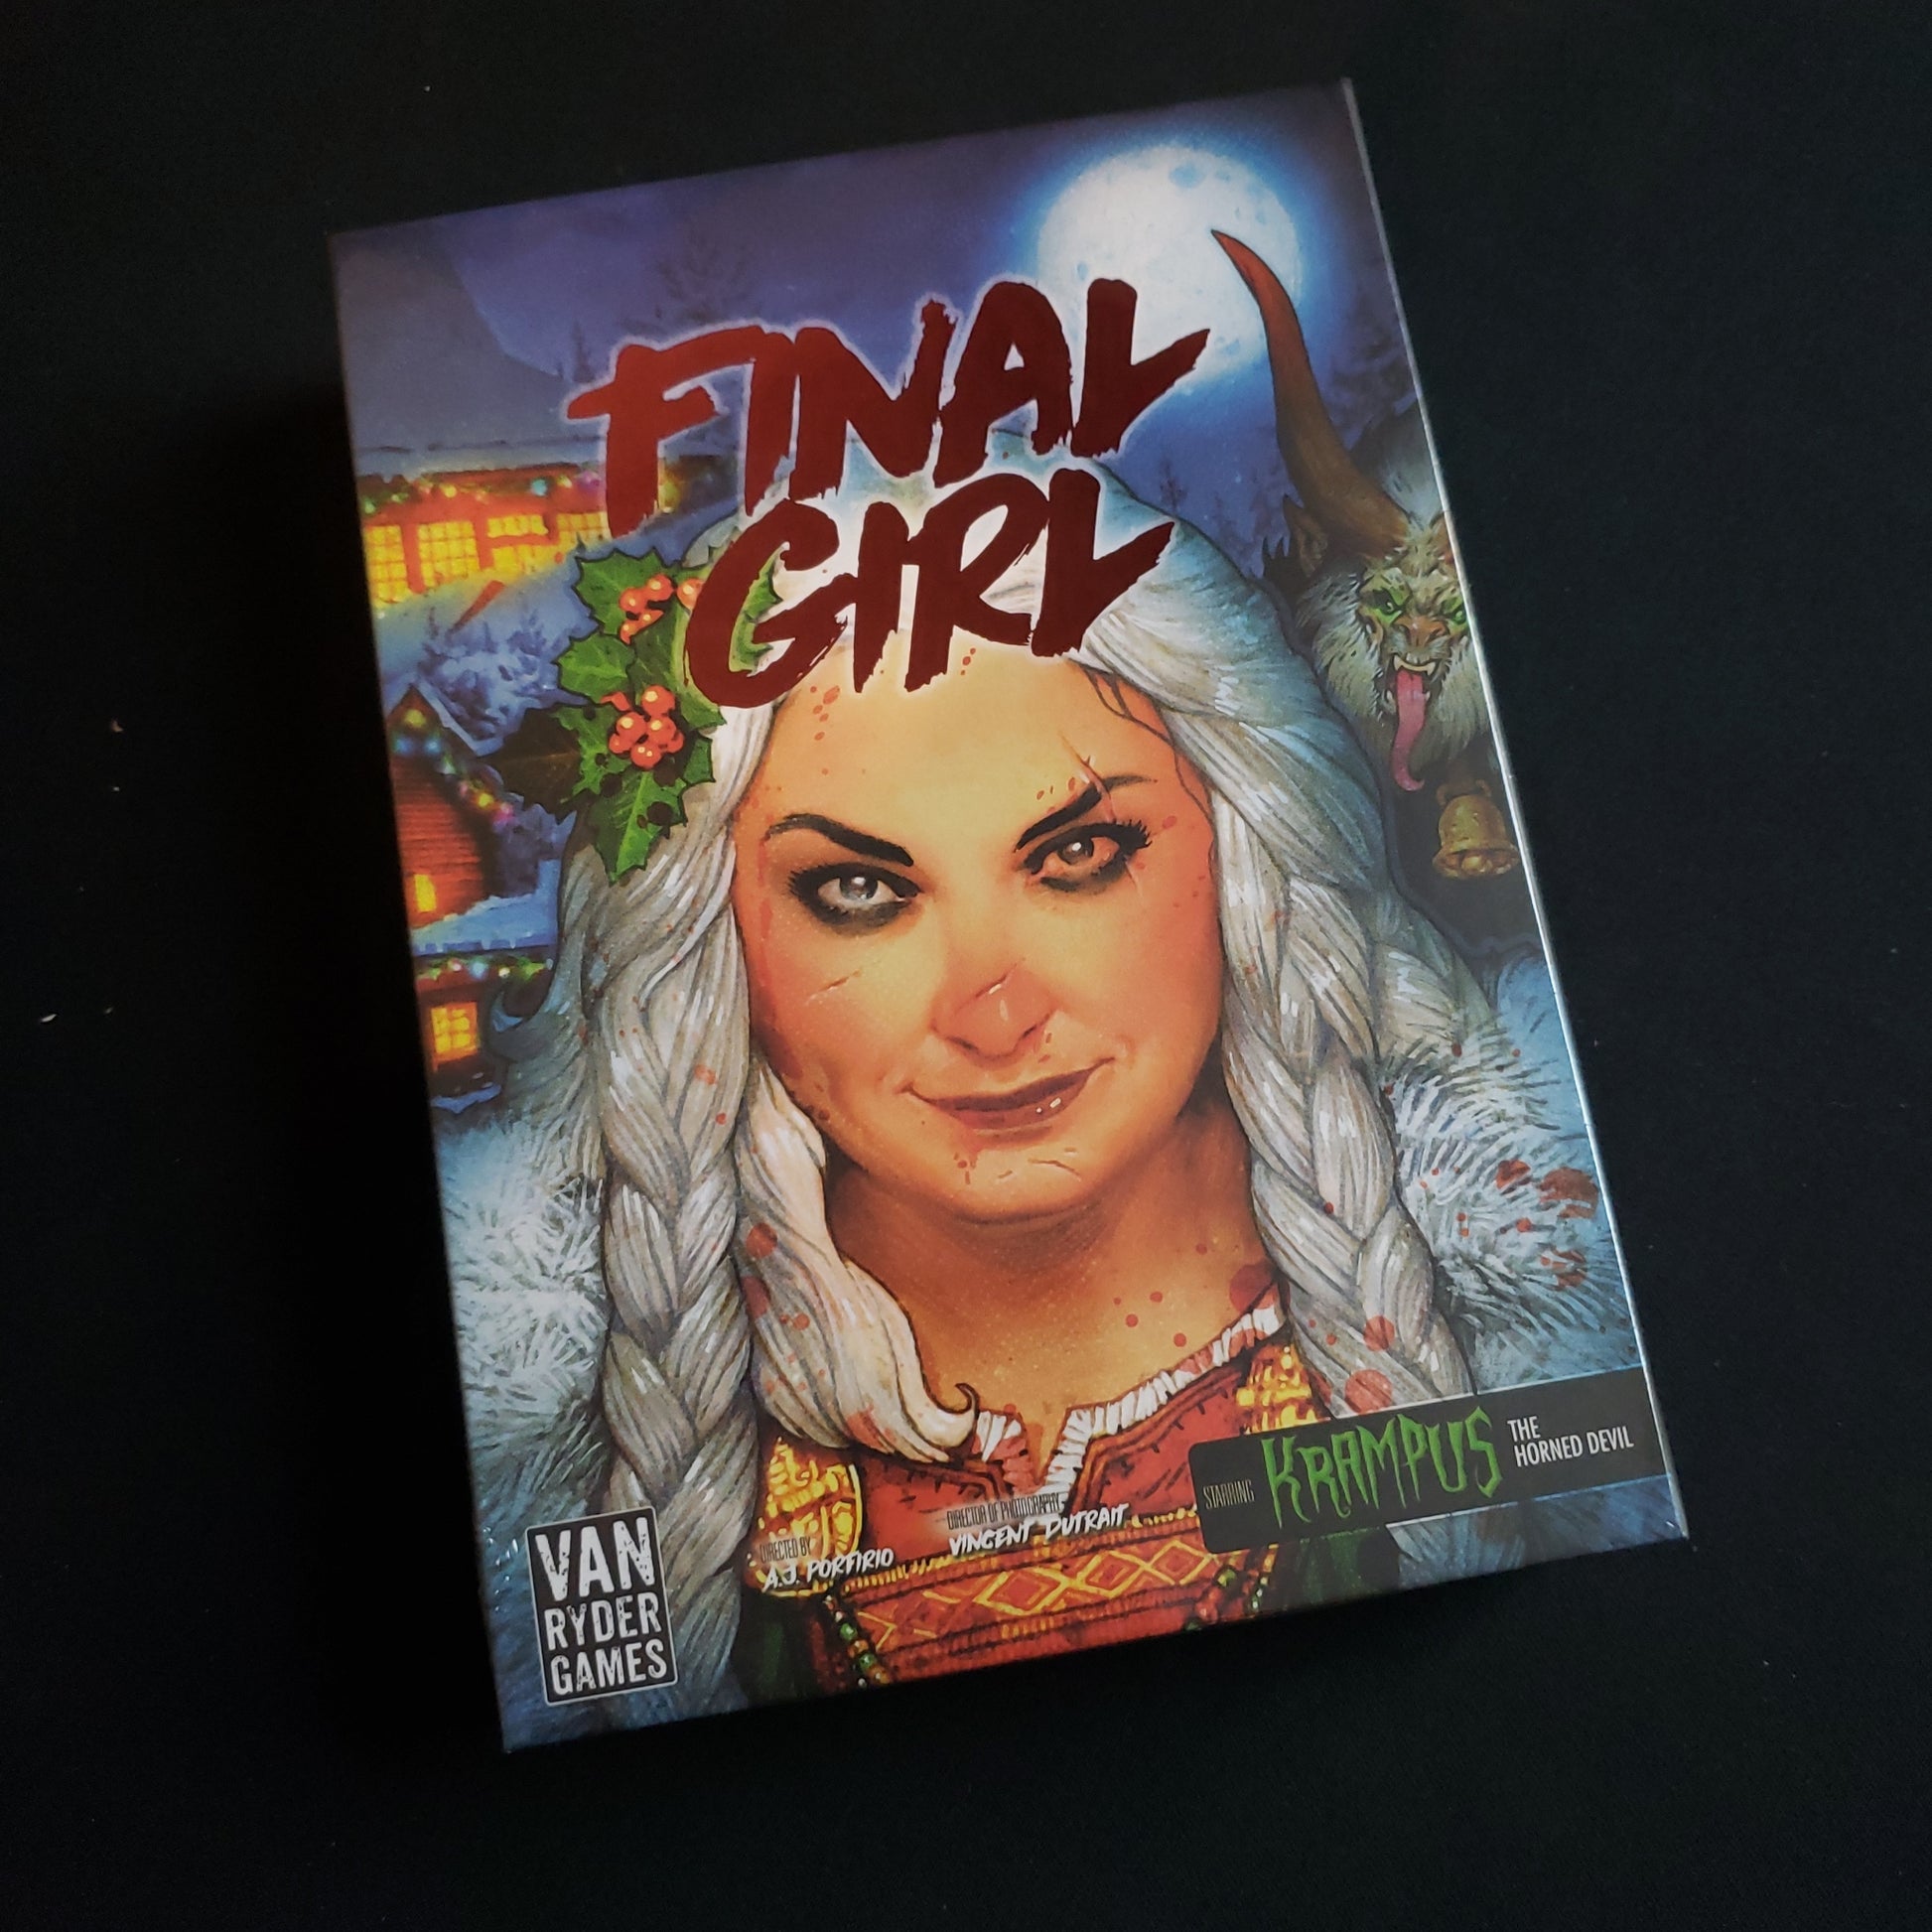 Image shows the front of the box for the North Pole Nightmare expansion for the board game Final Girl